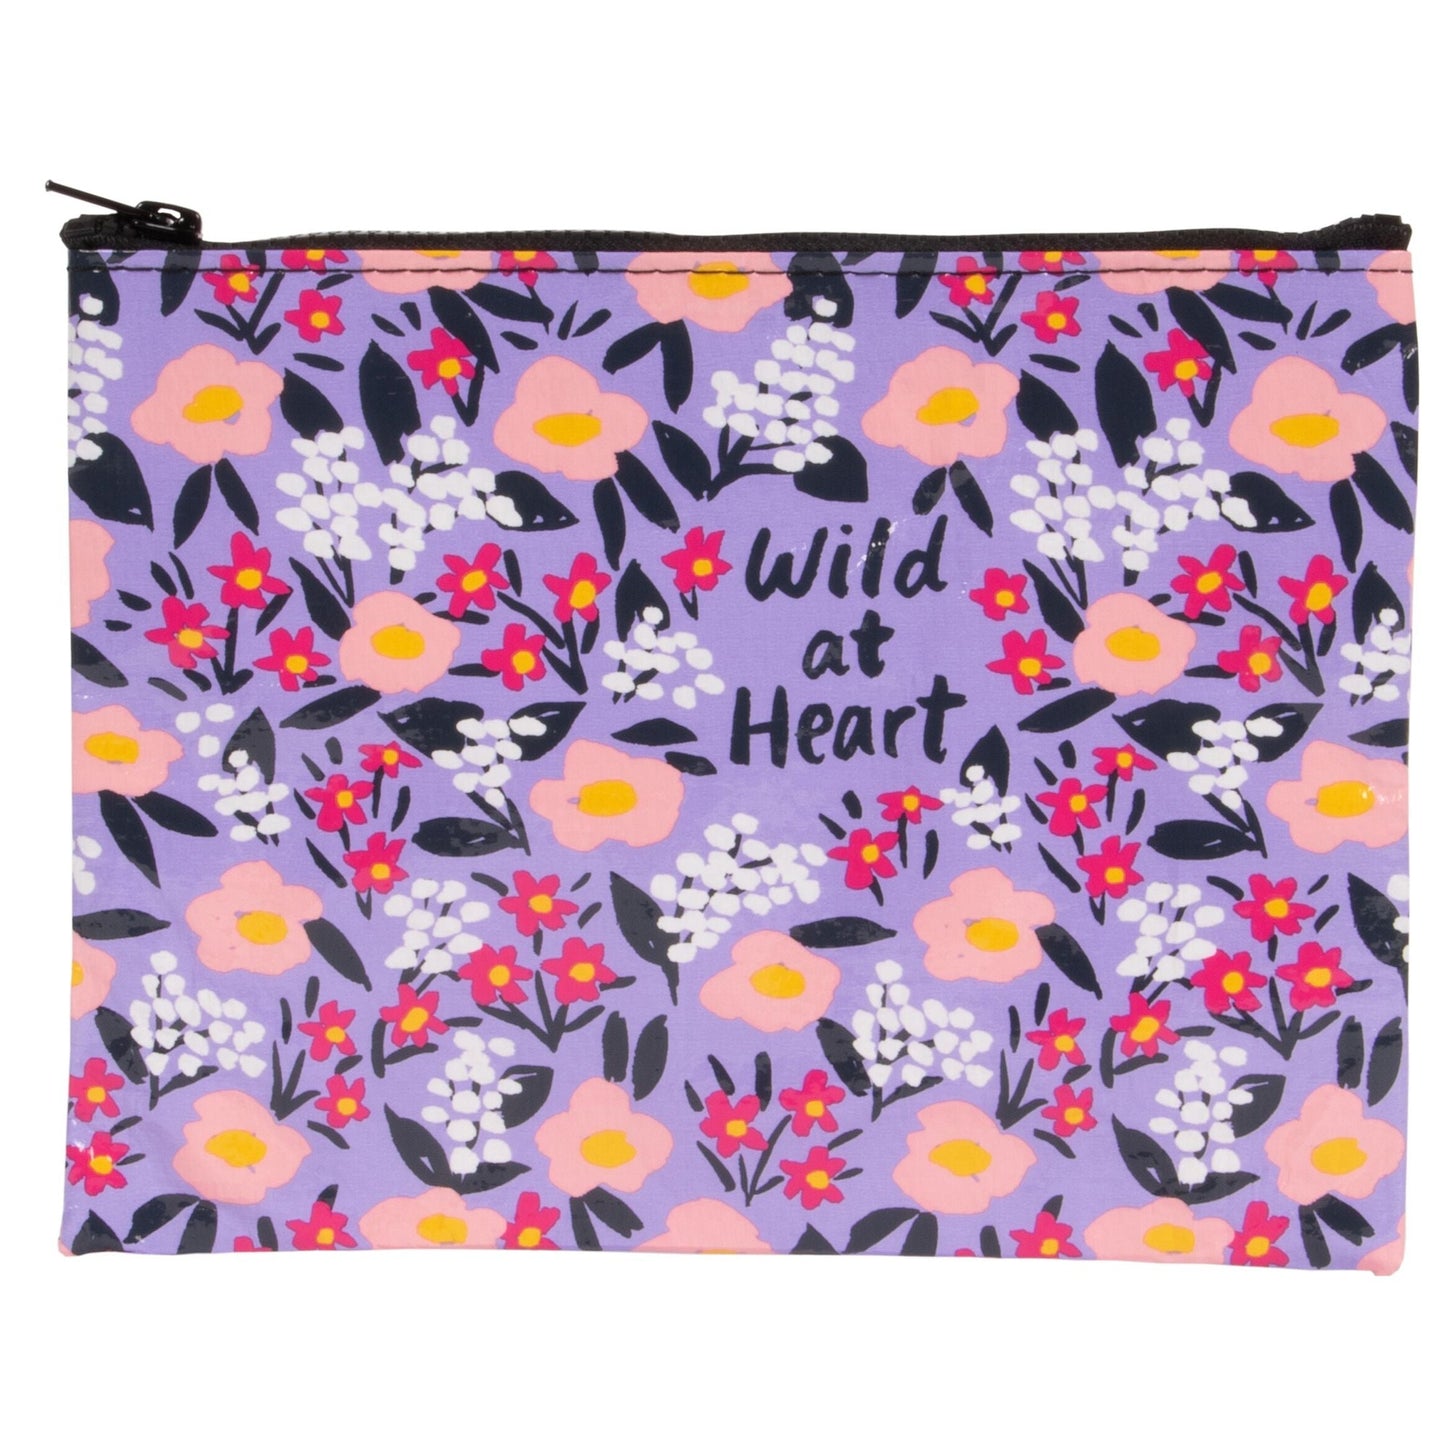 Wild At Heart Floral Recycled Material Zipper Pouch